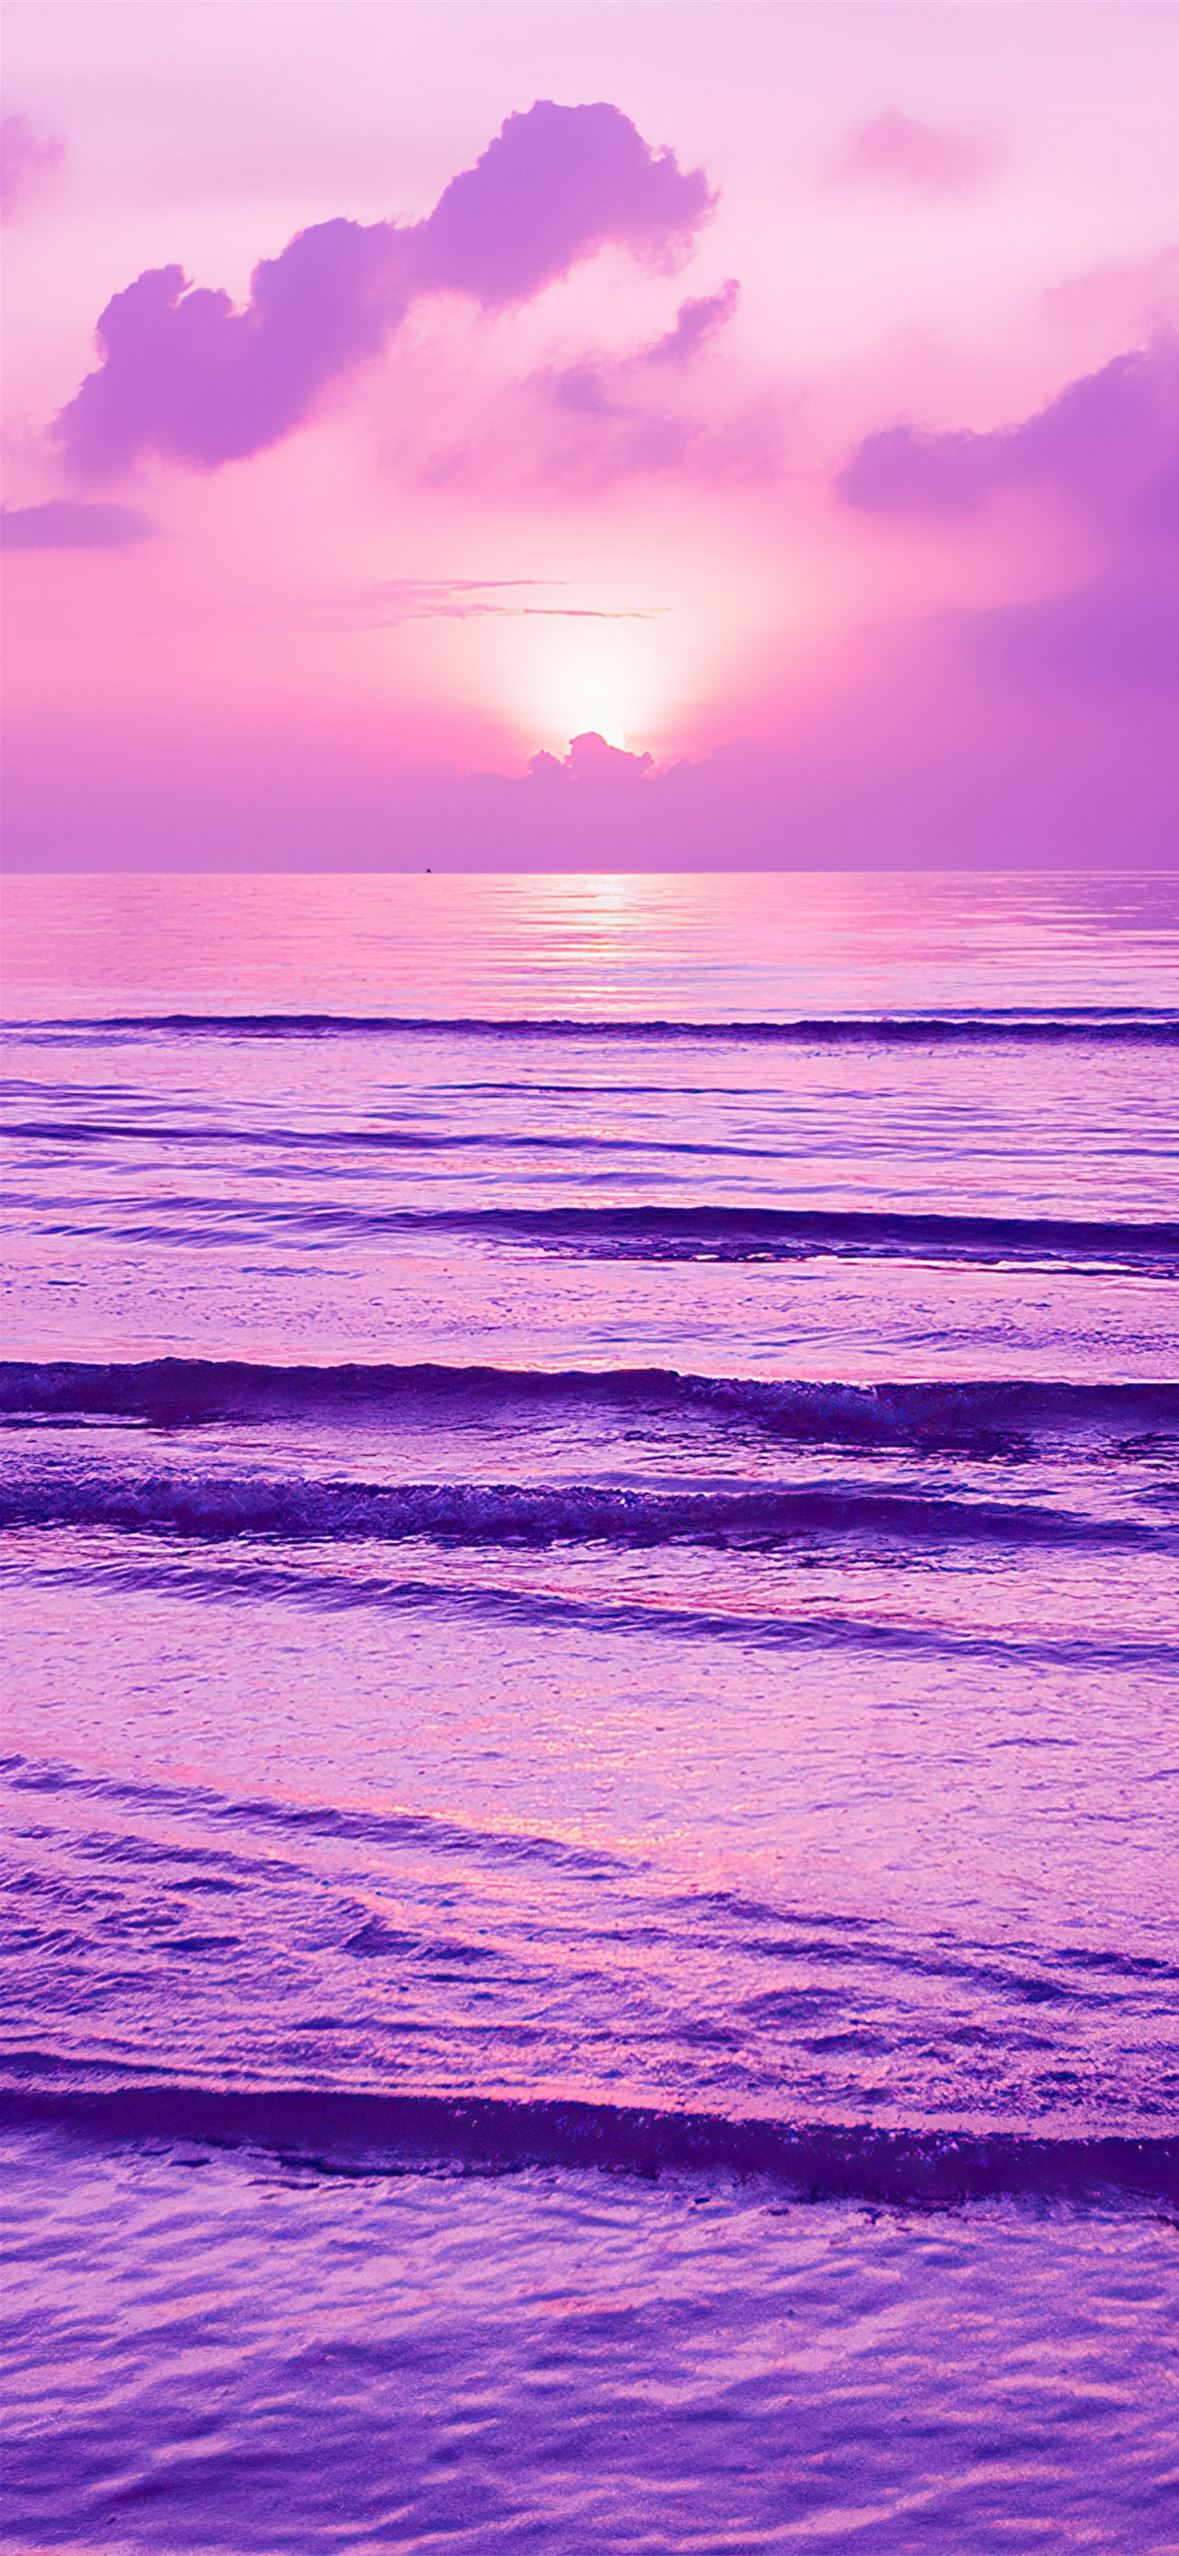 A surfer riding the waves in front of an orange and purple sky - Sunset